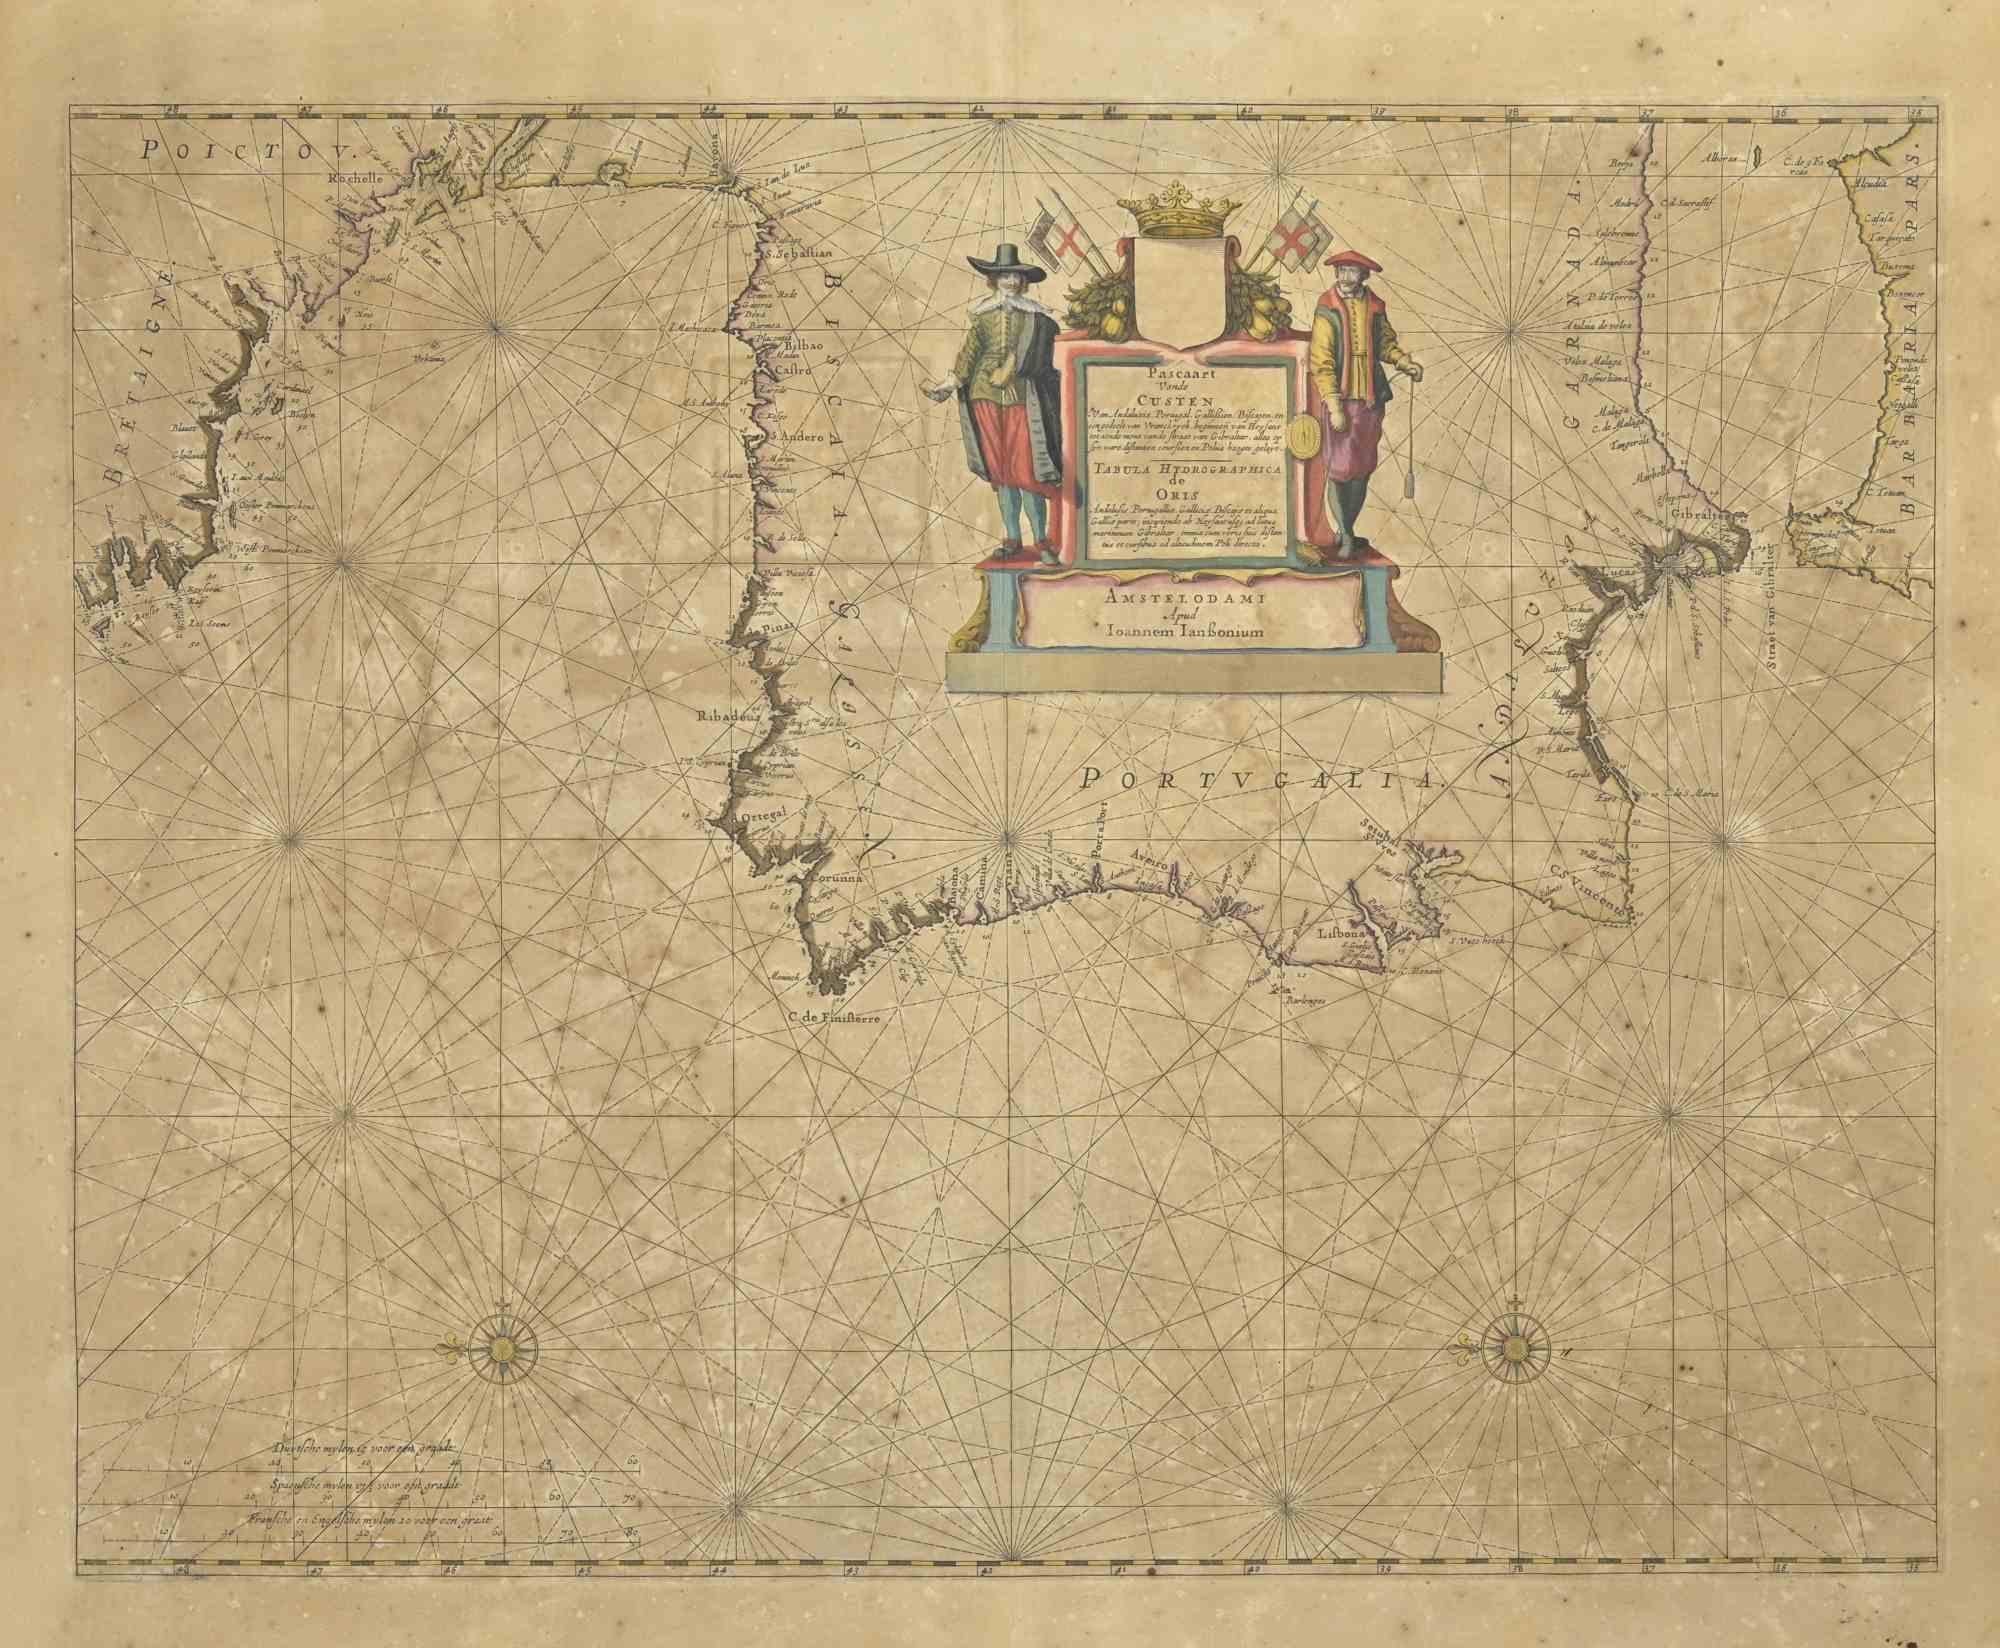 Antique Map - Gallia is an antique map realized in 1650 by Johannes Janssonius (1588-1664).

The Map is Hand-colored etching, with coeval watercoloring.

Good conditions with slight foxing.

From Atlantis majoris quinta pars, Orbem maritimum [Novus